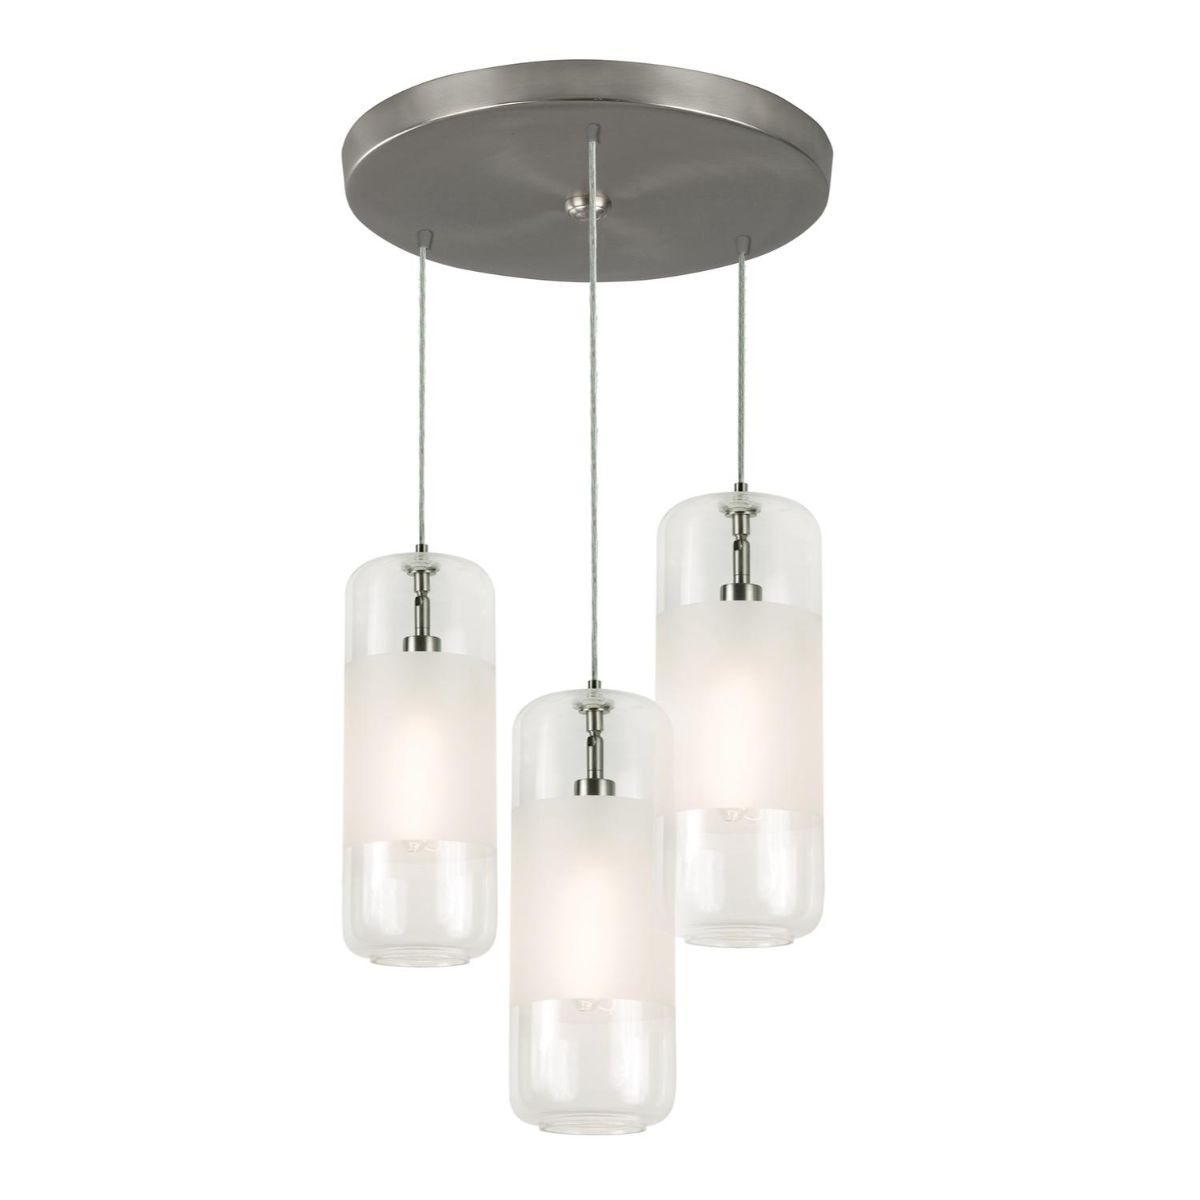 Hermosa 17 in. 3 lights Pendant Light Satin Nickel finish with Clear shade